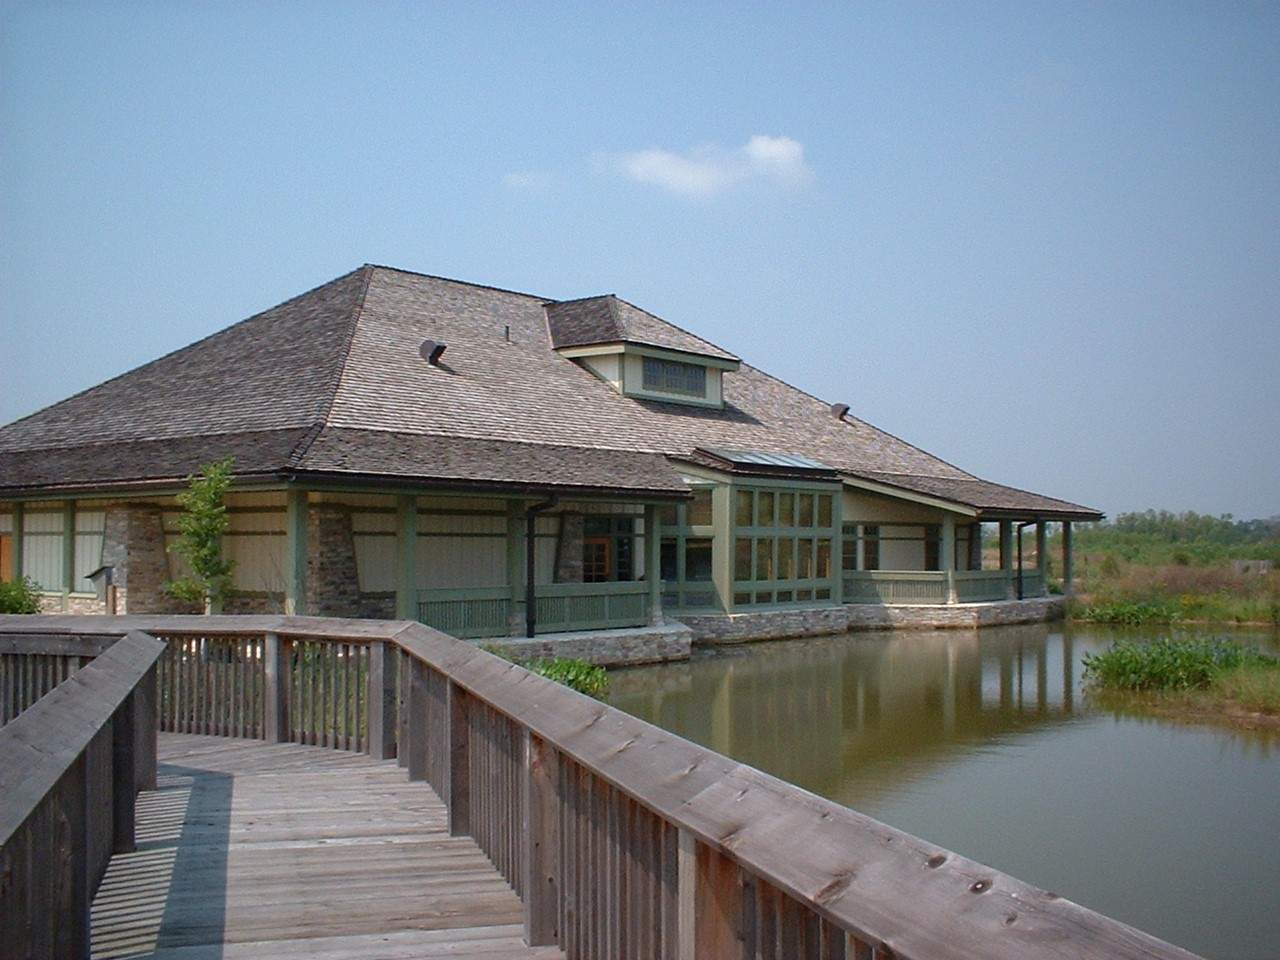 Boardwalk leading to the Cache River Information Center at the Cache River Wetlands